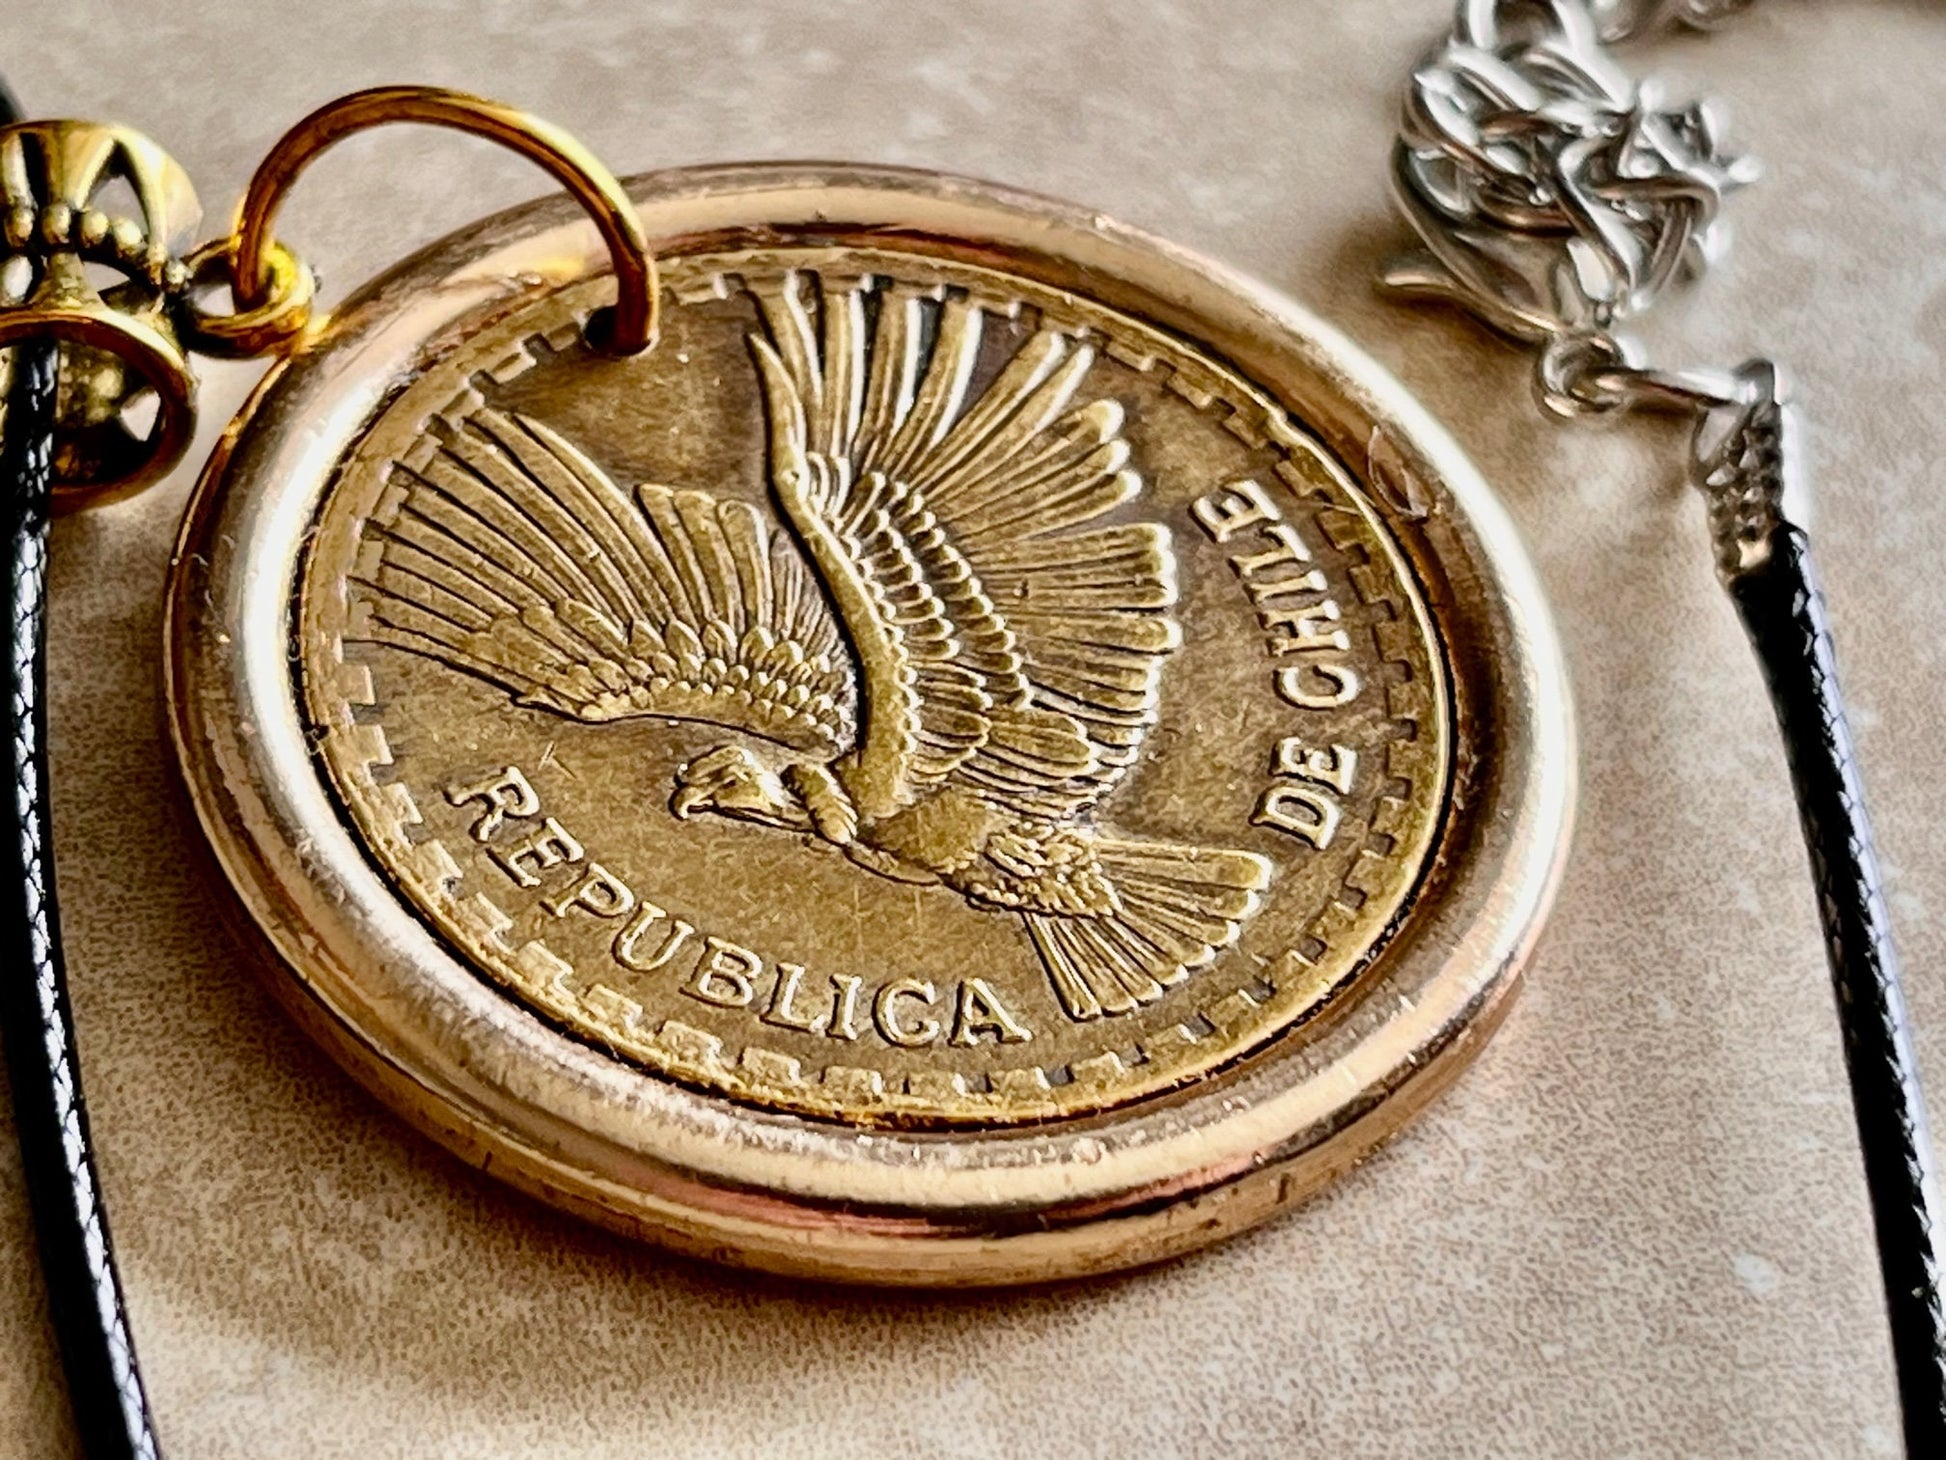 Chile 1965 Coin Pendant Necklace Chillan 10 Centesimos Personal Vintage Handmade Jewelry Gift Friend Charm For Him Her World Coin Collector